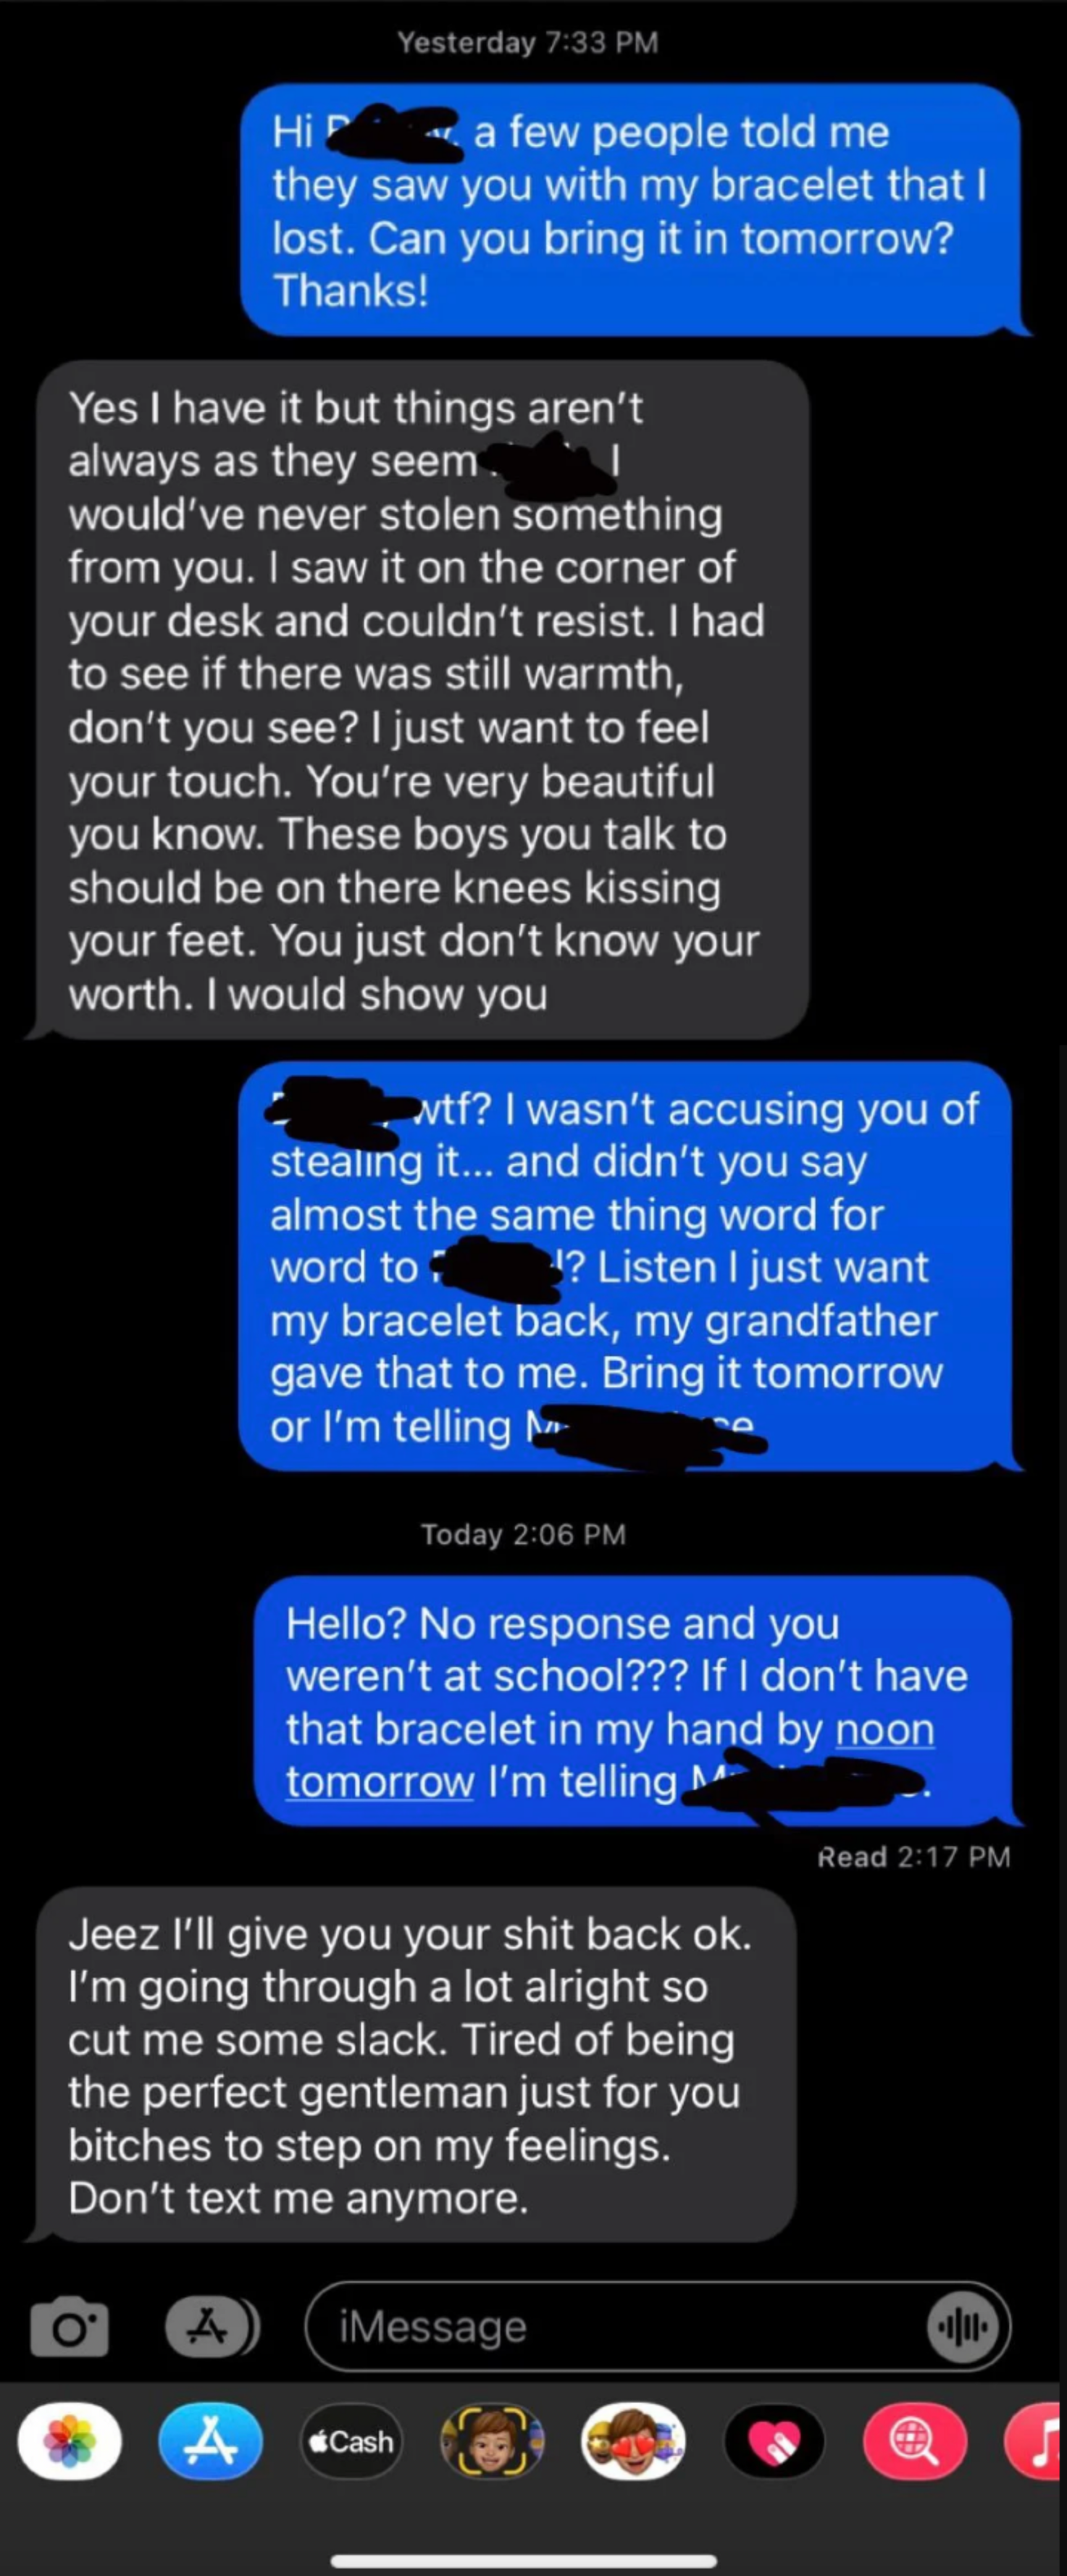 A woman asks for her bracelet back, the man says he wanted to keep it to feel her touch, she asks for it back again, and he says he&#x27;ll give it back but he&#x27;s &quot;tired of being the perfect gentleman just for you bitches to step on my feelings&quot;